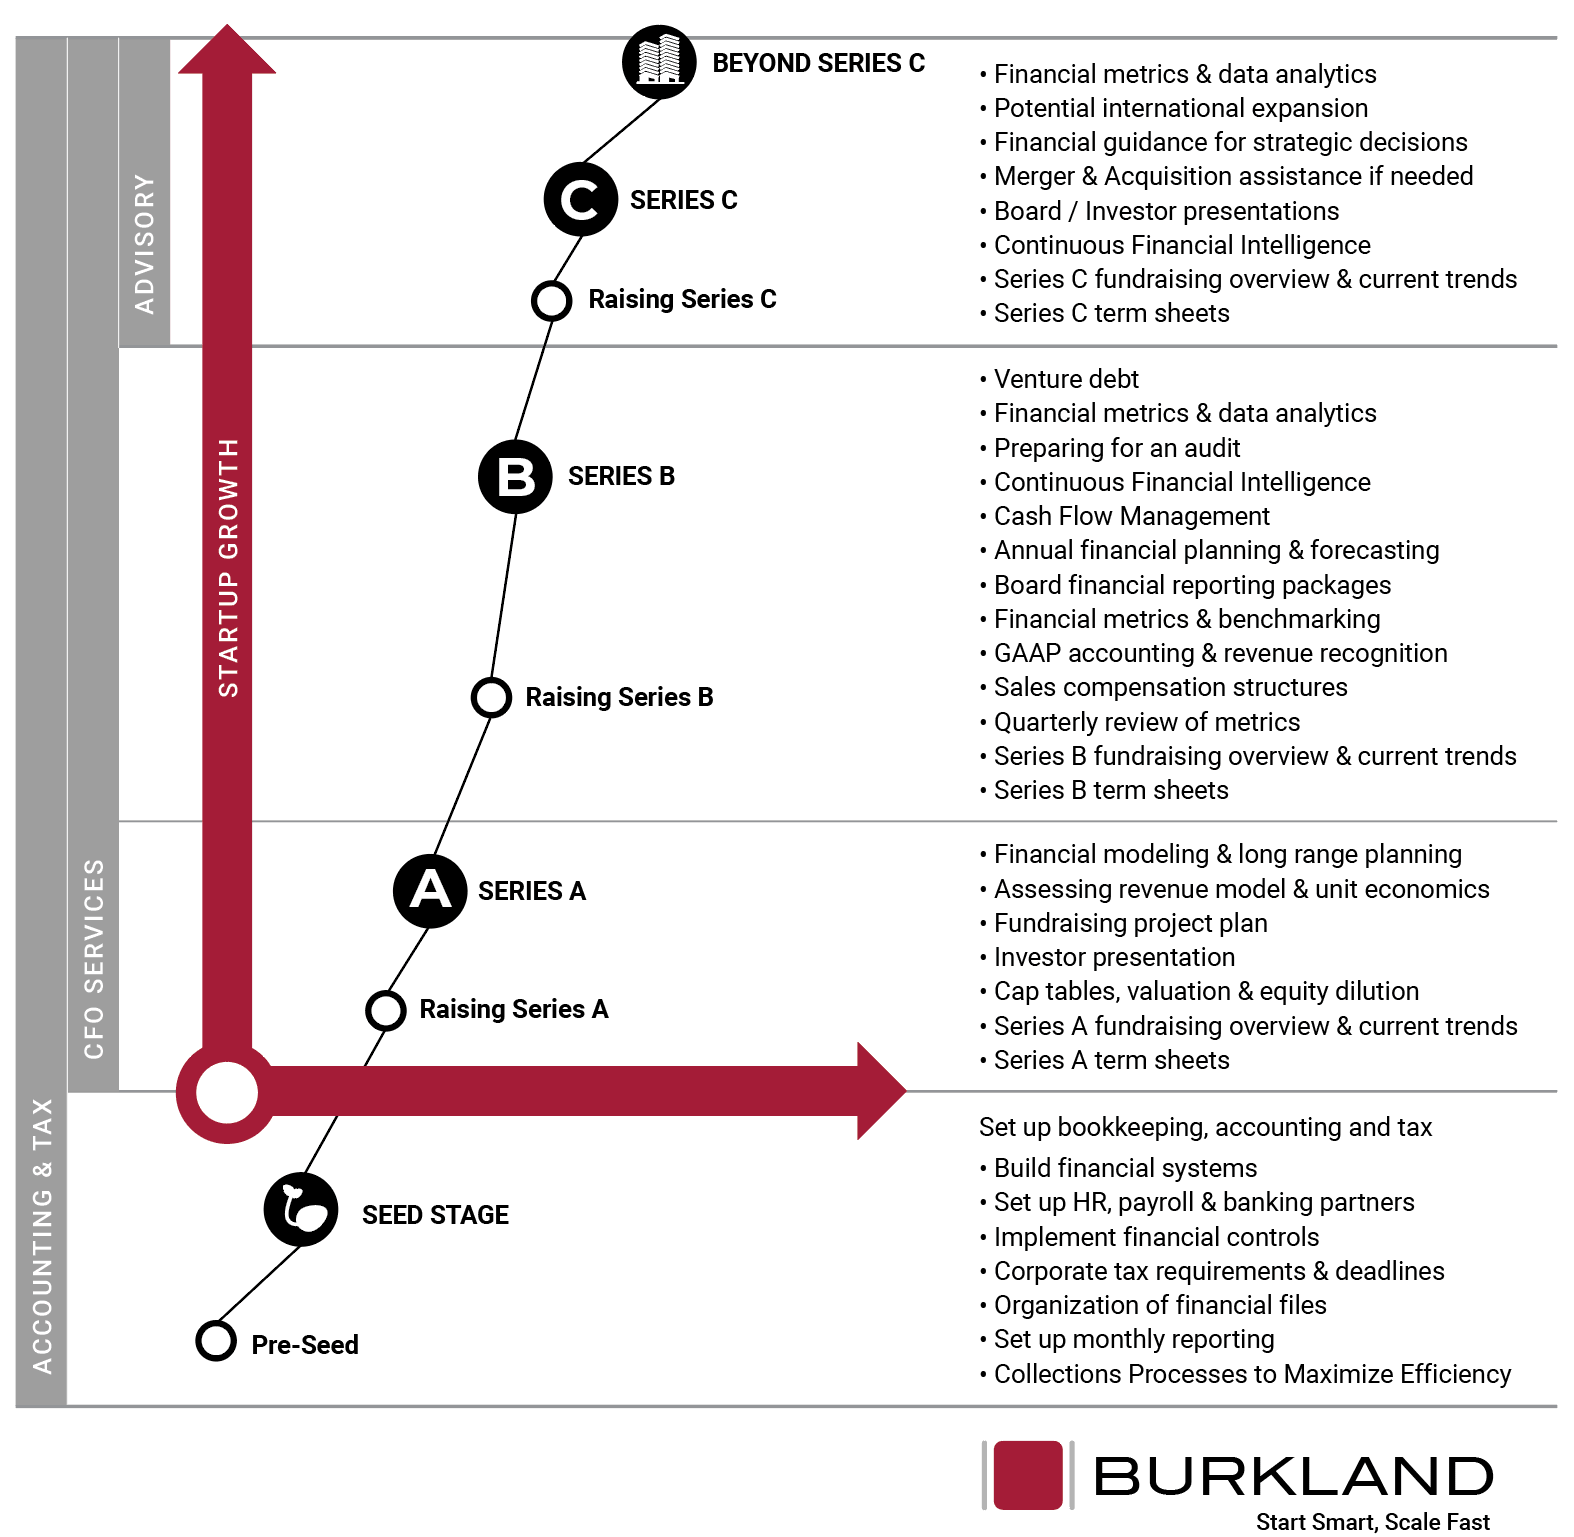 burkland-services-by-startup-growth-stage-2